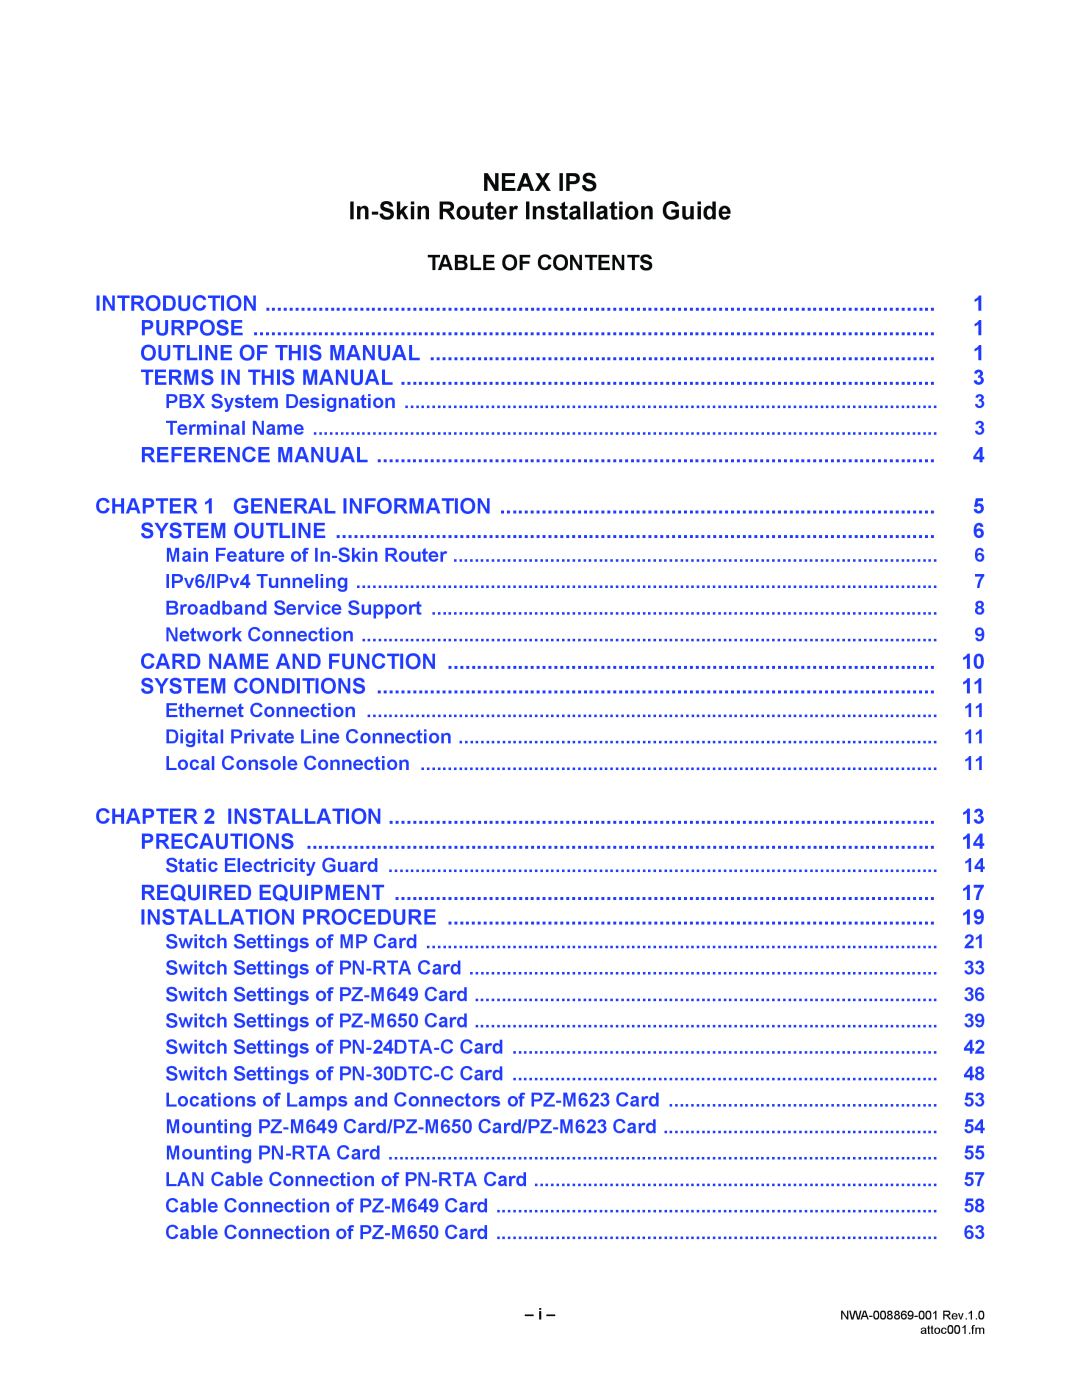 NEC NWA-008869-001 manual Neax Ips, In-Skin Router Installation Guide 